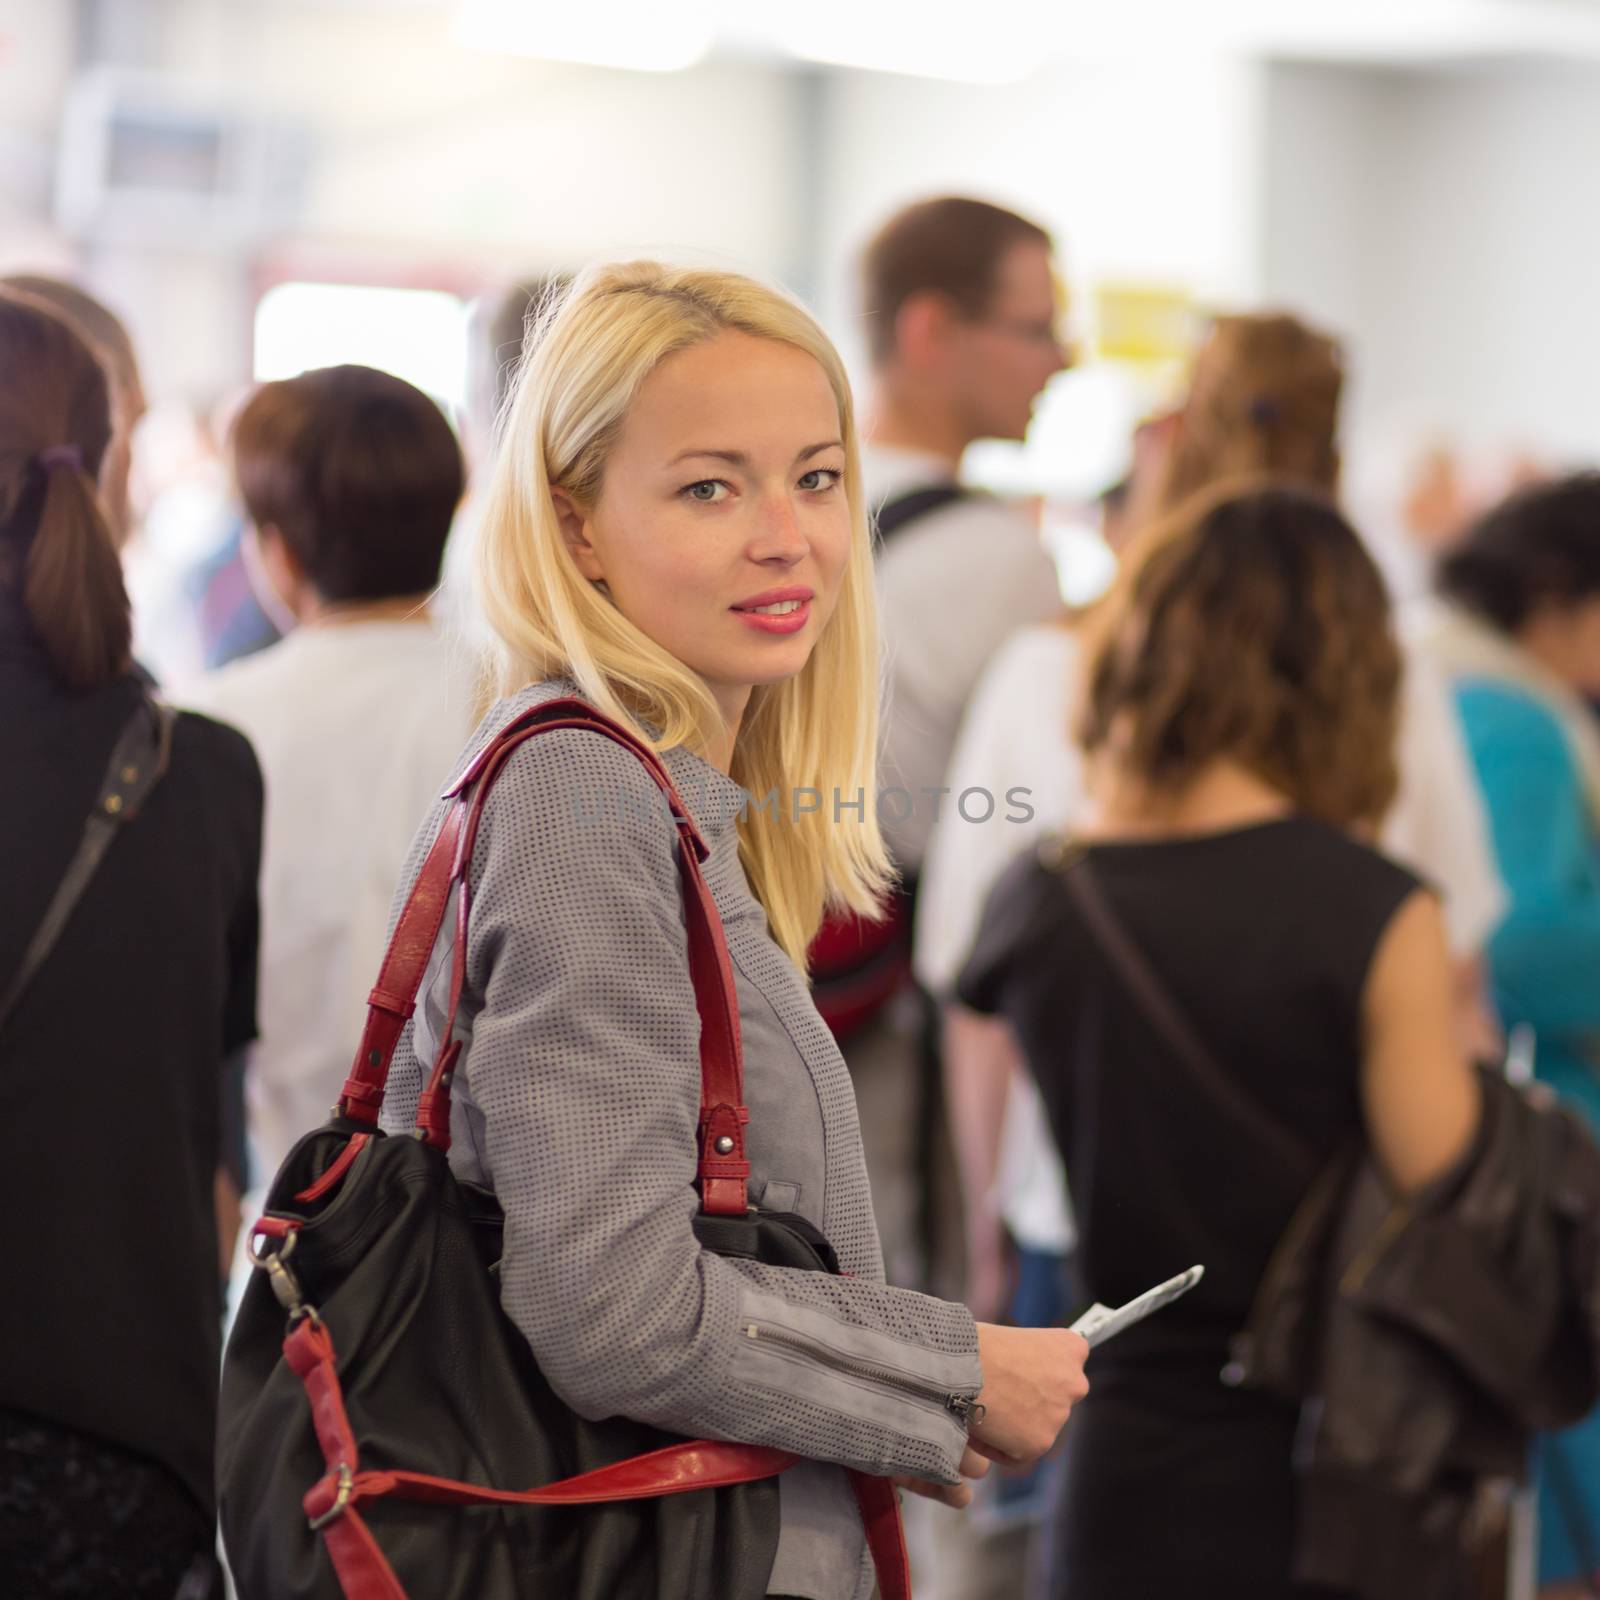 Young blond caucsian woman waiting in line with plain ticket in her hands. Lady standing in a long queue to board a plane.